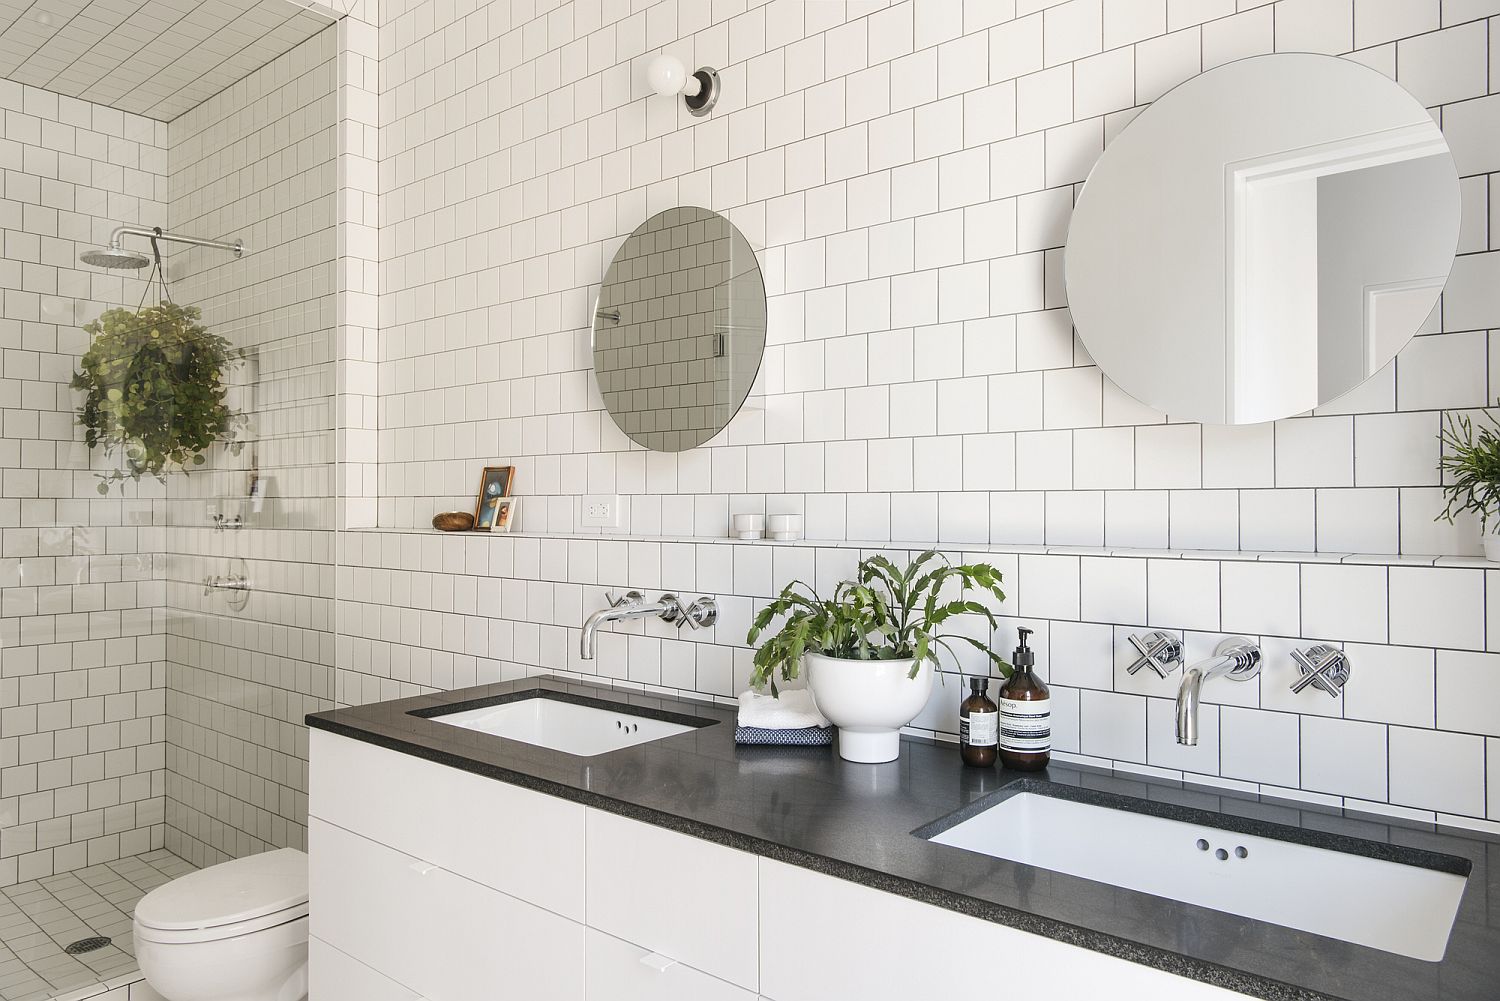 Polished modern bathroom in white with twin mirrors and tiled walls